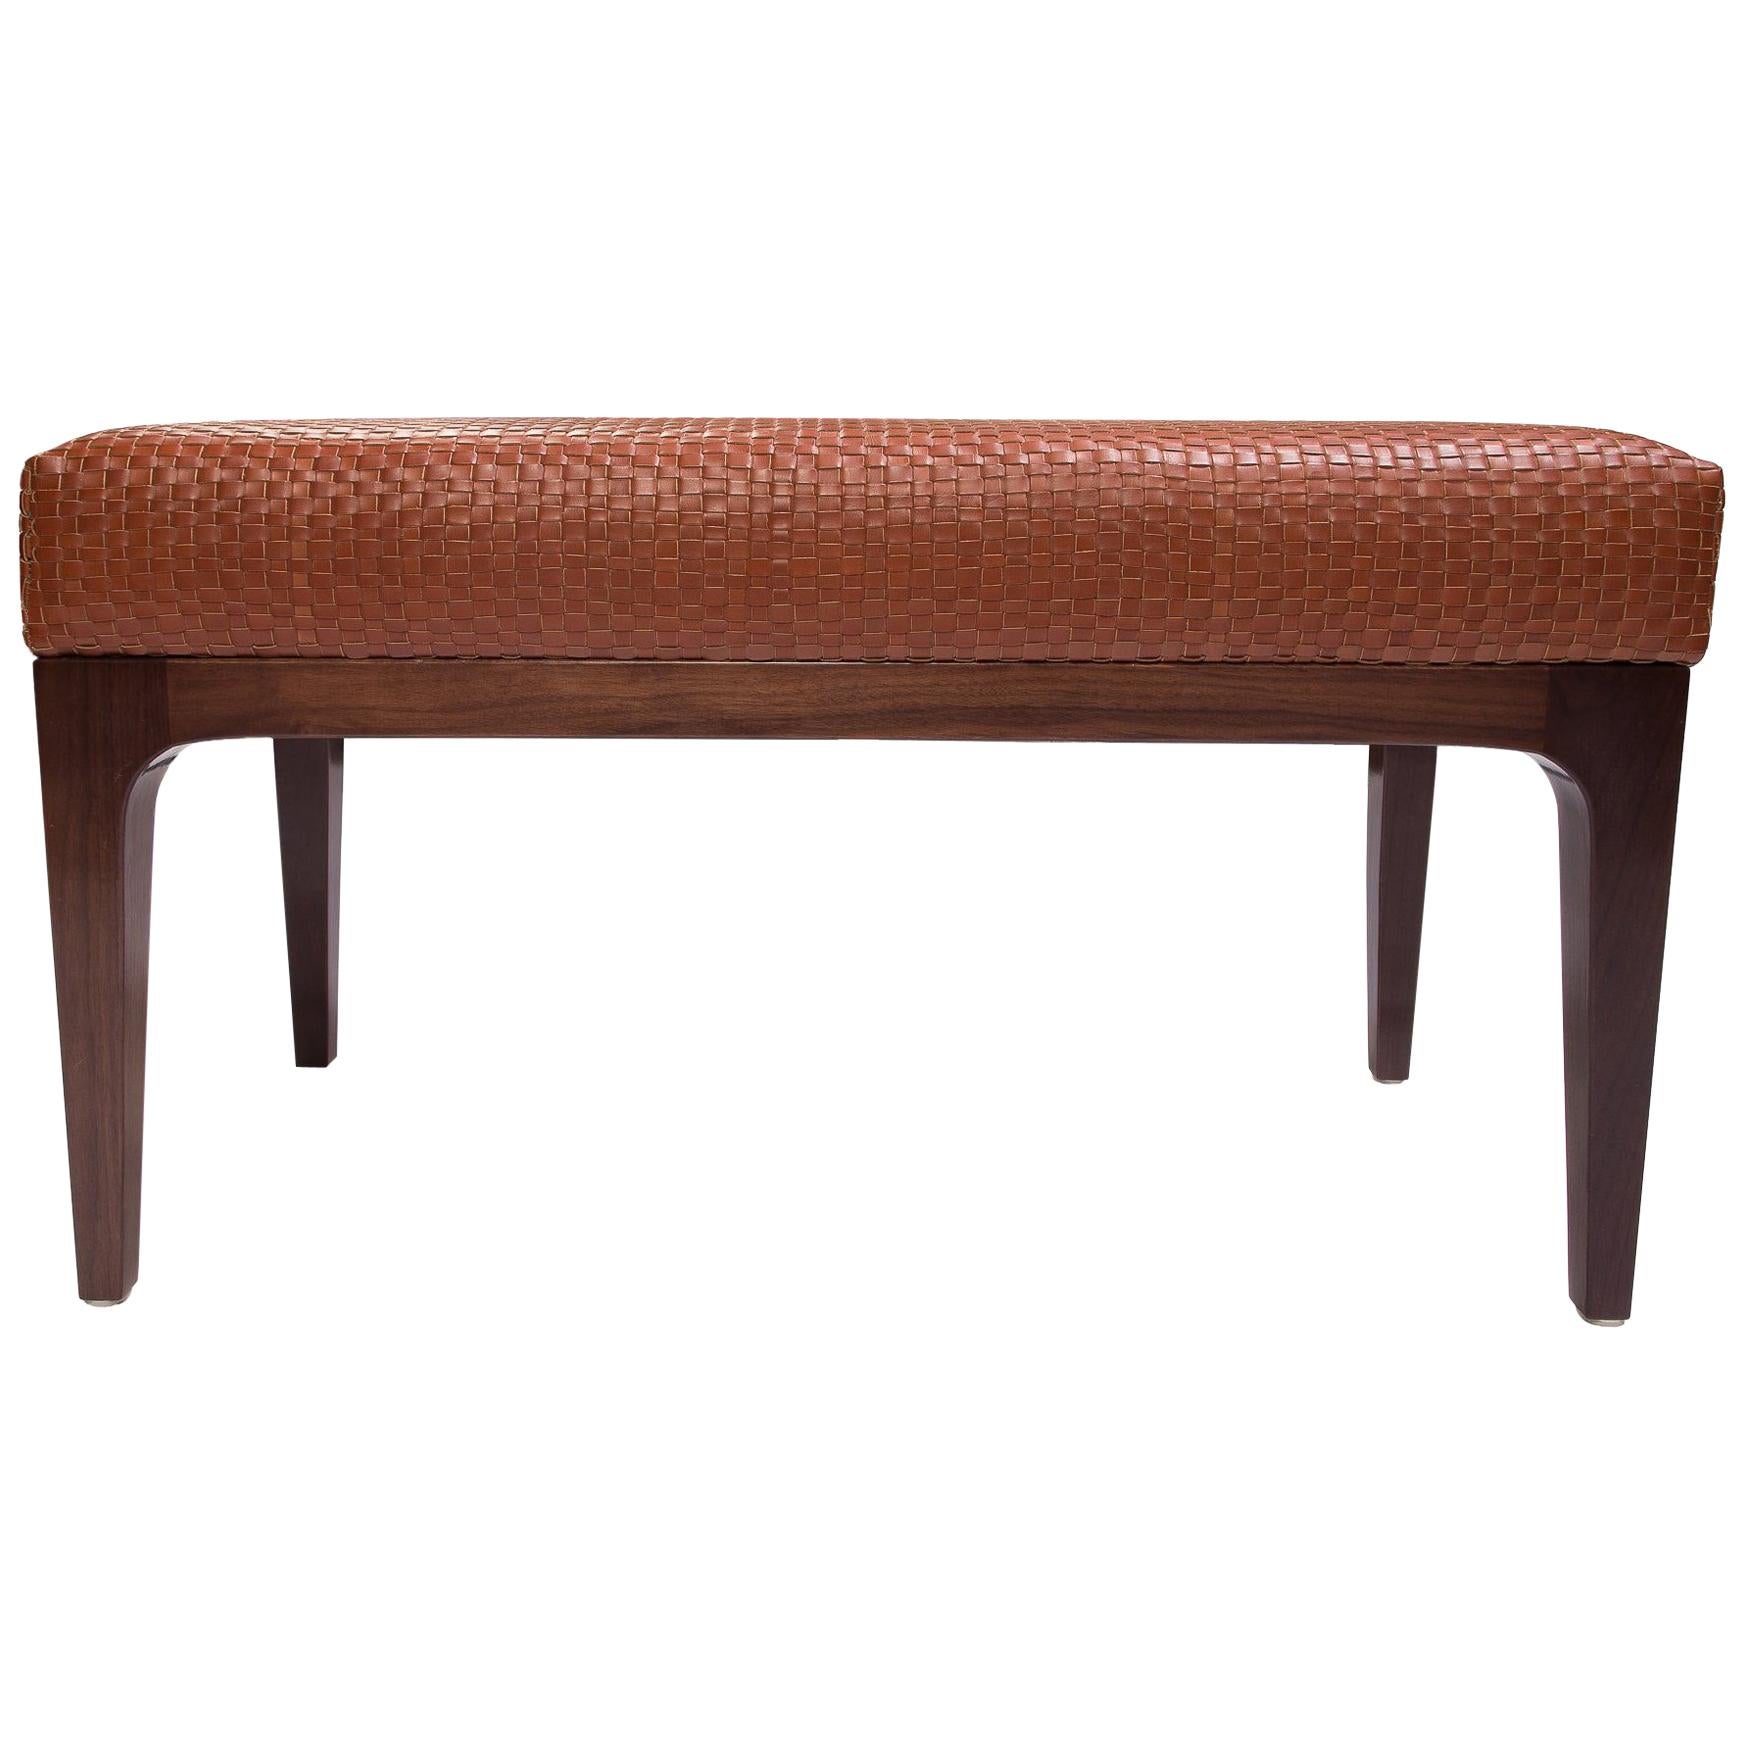 Raphael Bench with Mid-Century Modern Style Walnut Frame & Basket weave Leather